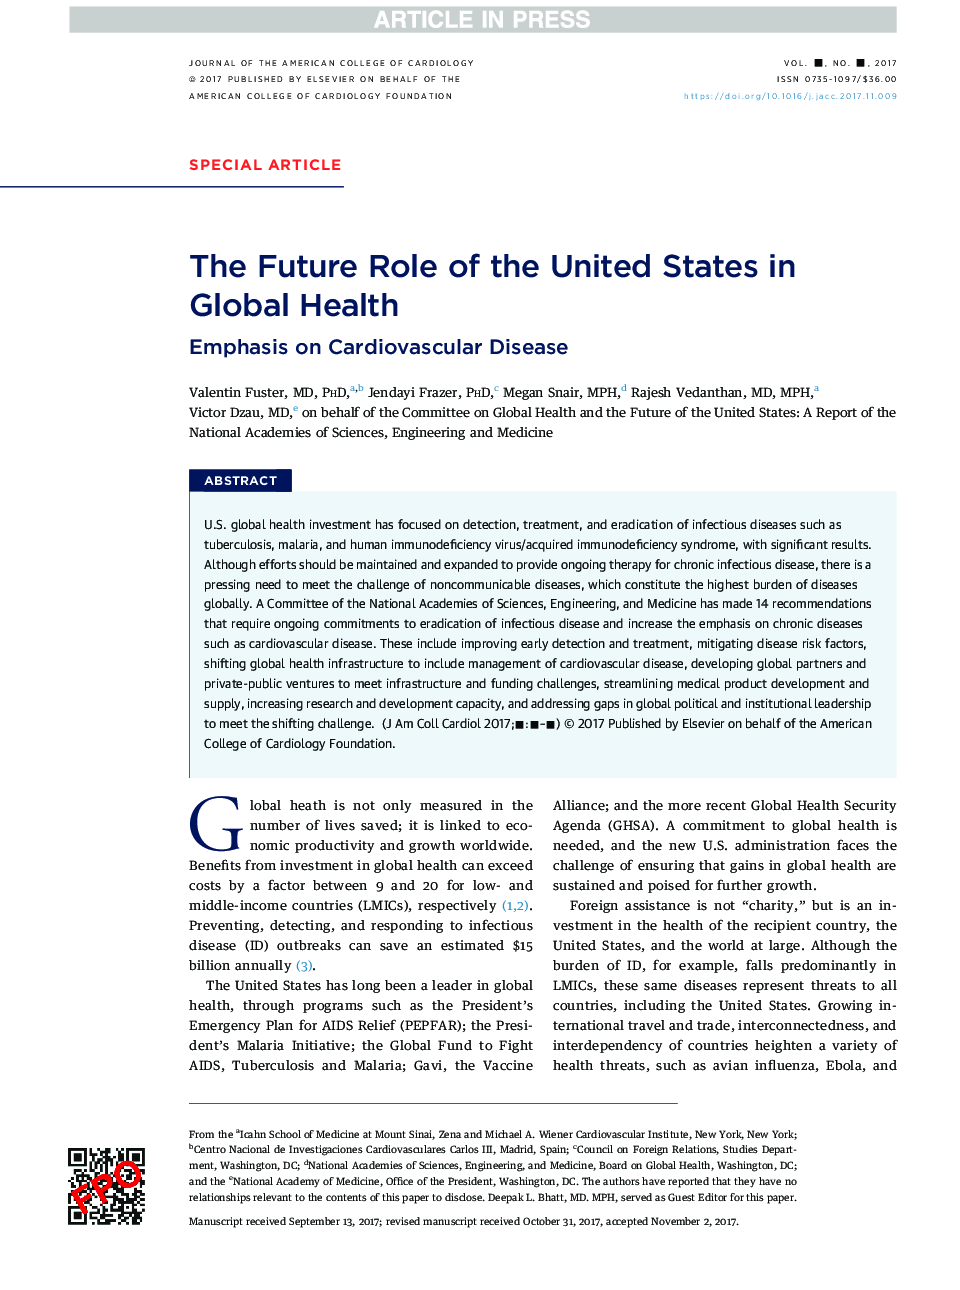 The Future Role of the United States in Global Health